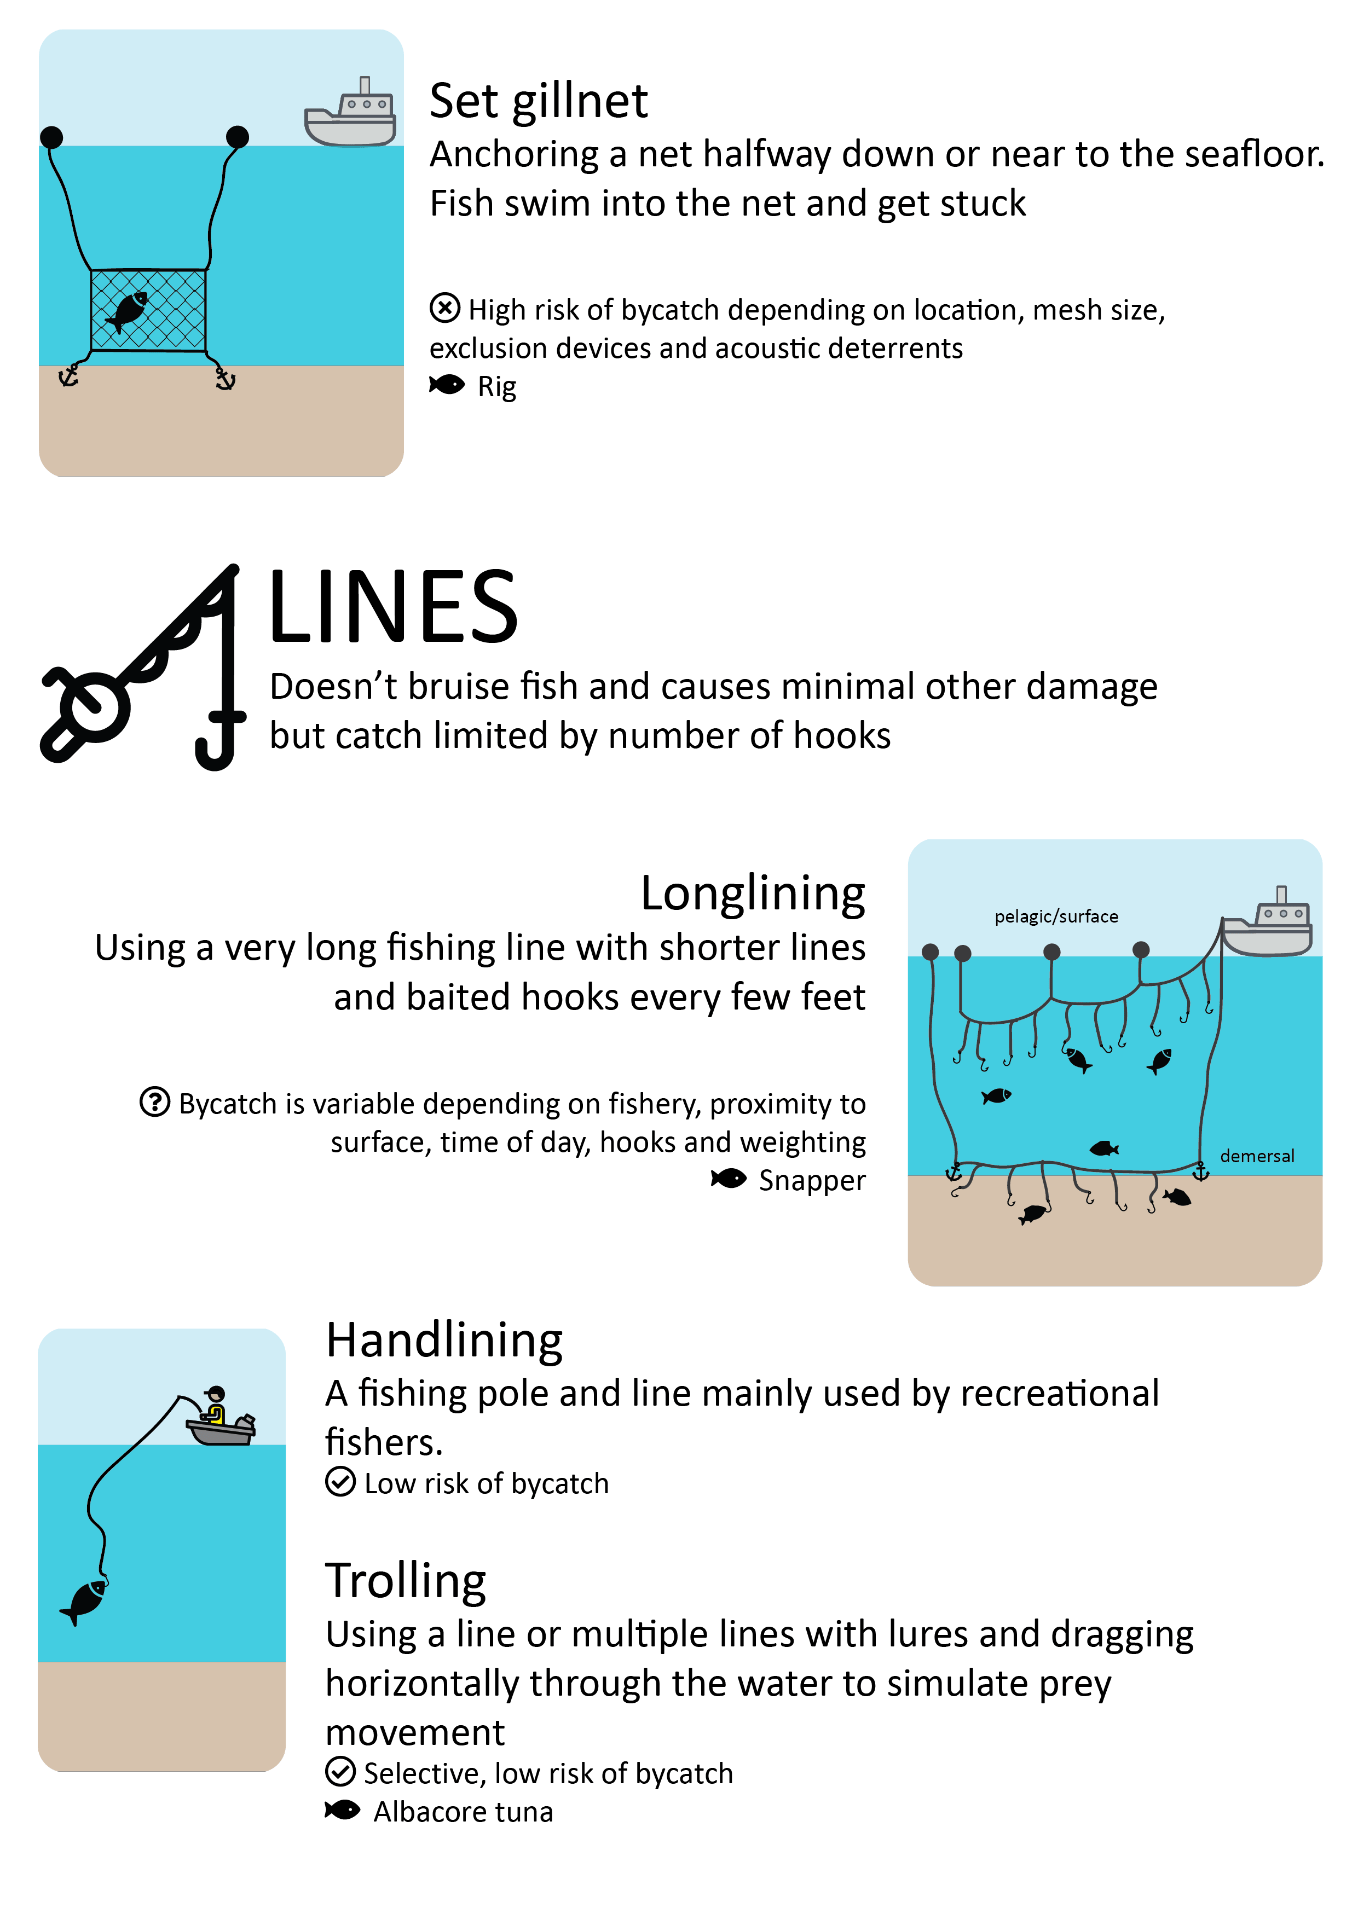 Set gillnet: anchoring a net halfway down or near to the seafloor. Fish swim into the net and get stuck. High risk of bycatch depending on location, mesh size, exclusion devices and acoustic deterrents. Lines - don't bruise fish and causes minimal other damage but catch limited by number of hooks. Longlining involves using a very long fishing line with shorter lines and baited hooks every few feet. Bycatch is variable depending on fishery, proximity to surface, time of day, hooks and weighting. Handlining involves using a pole and line as mainly used by recreational fishers, with a low risk of bycatch. Trolling uses a line or multiple lines with lures dragged horizontally through the water to simulate prey movement. It is selective with a low risk of bycatch.